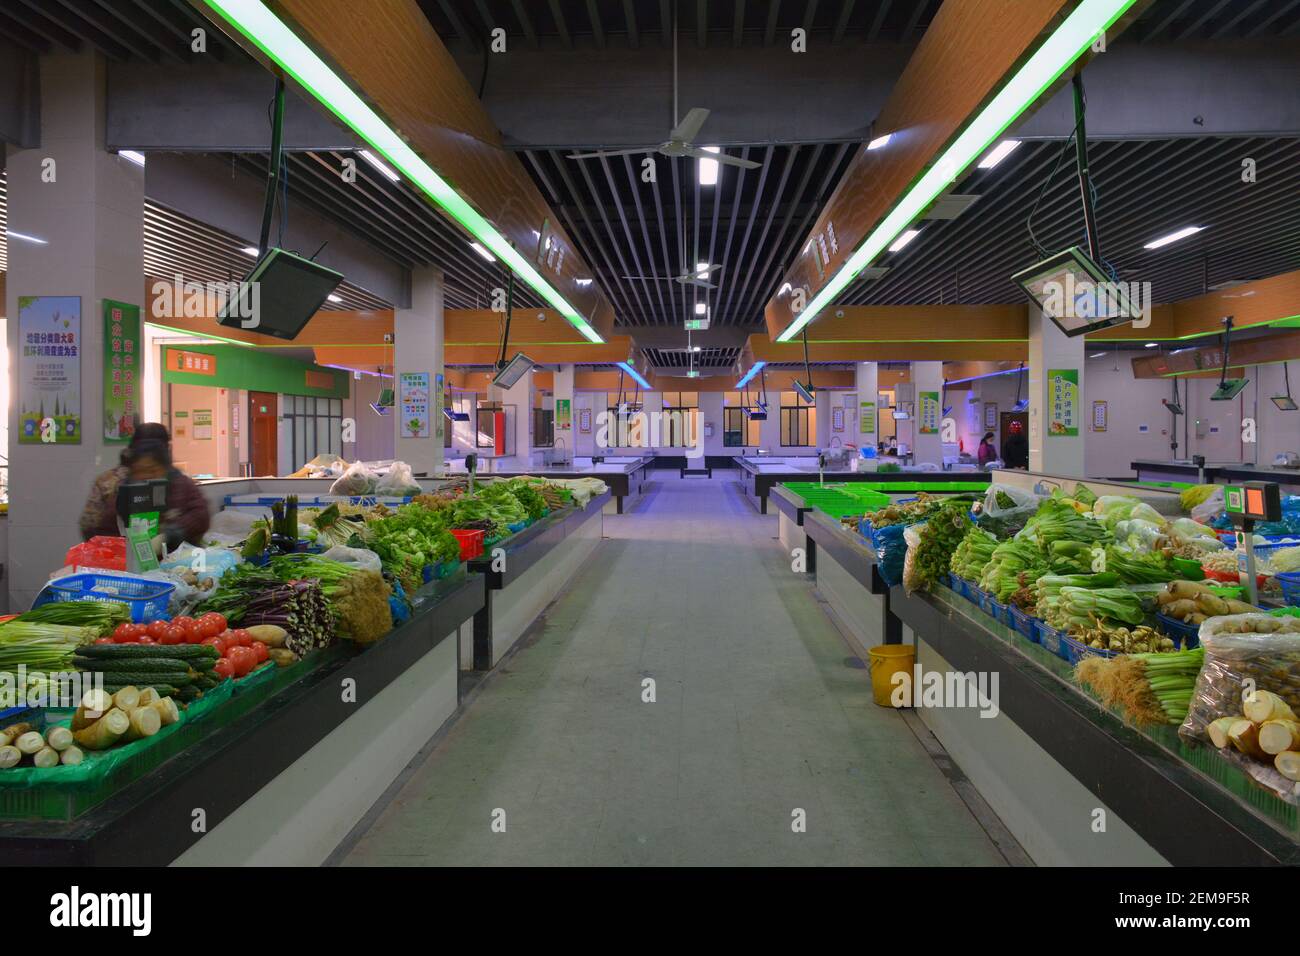 Inside a Chinese wet market, so called as the floors are often washed down to clear rubbish. This is in Jiaxing during new year so almost empty. Stock Photo